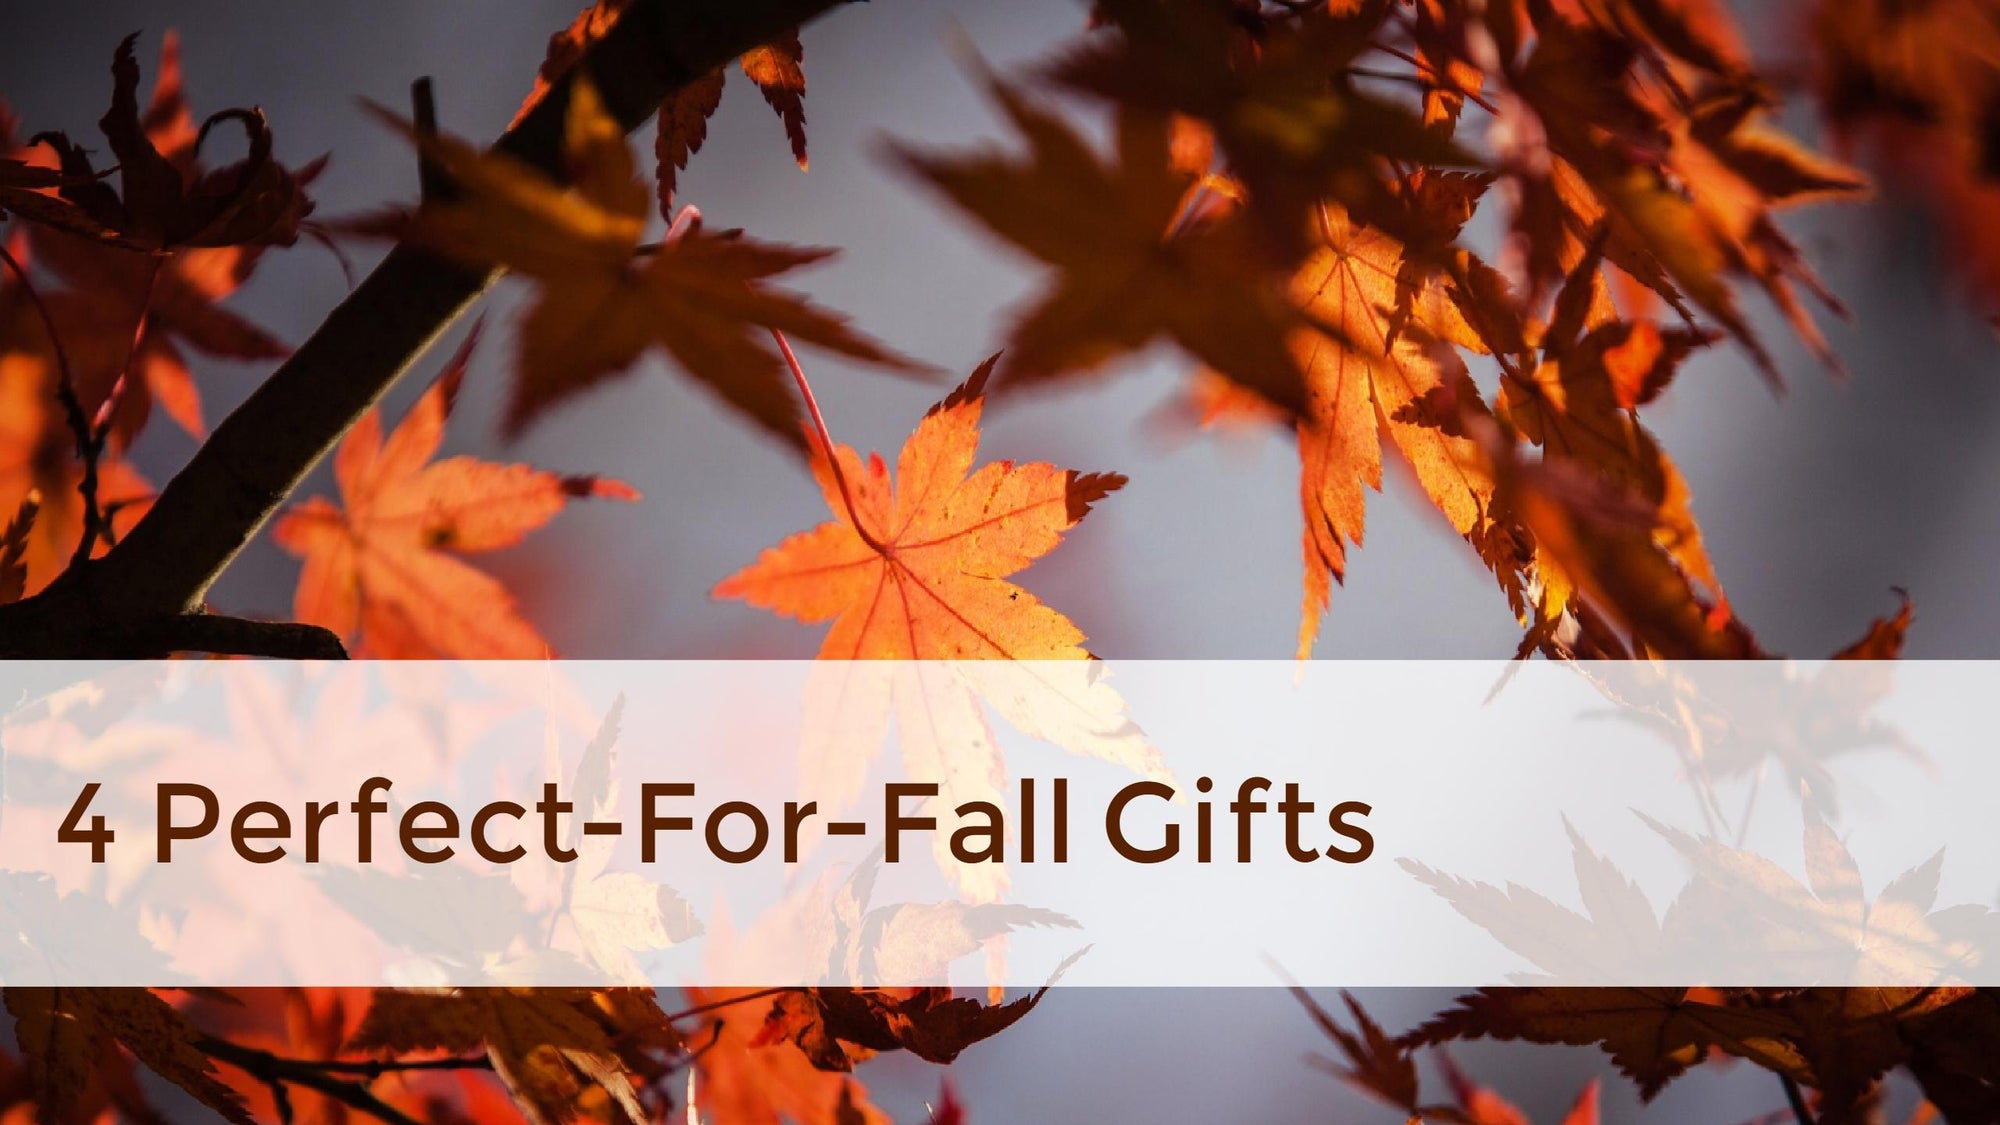 4 Perfect-for-Fall Gifts